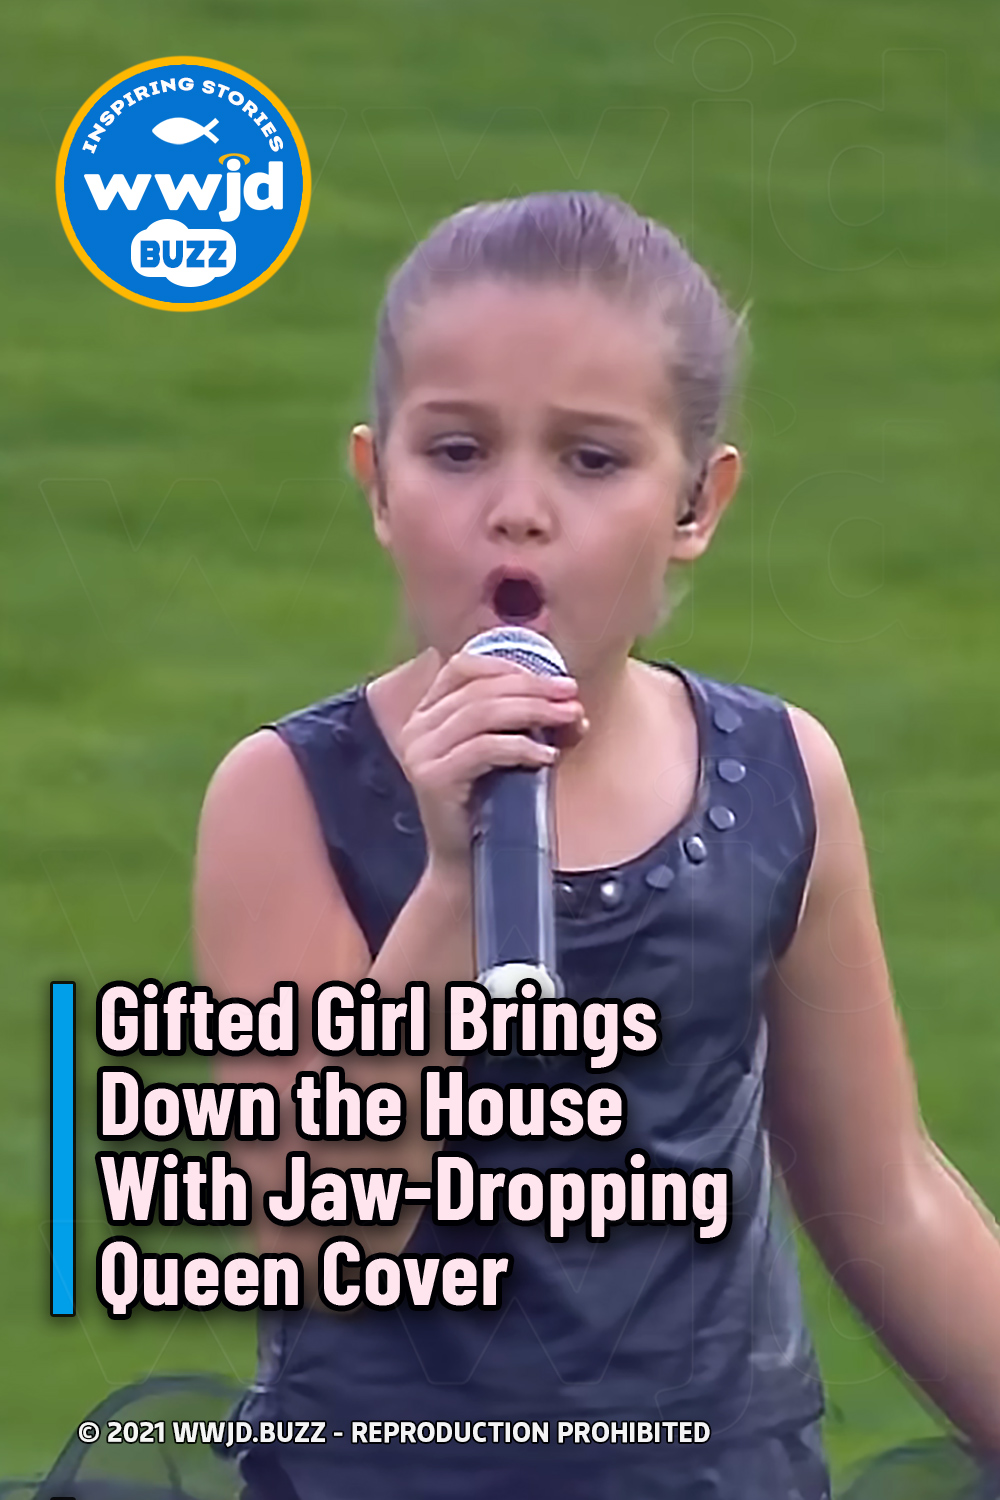 Gifted Girl Brings Down the House With Jaw-Dropping Queen Cover